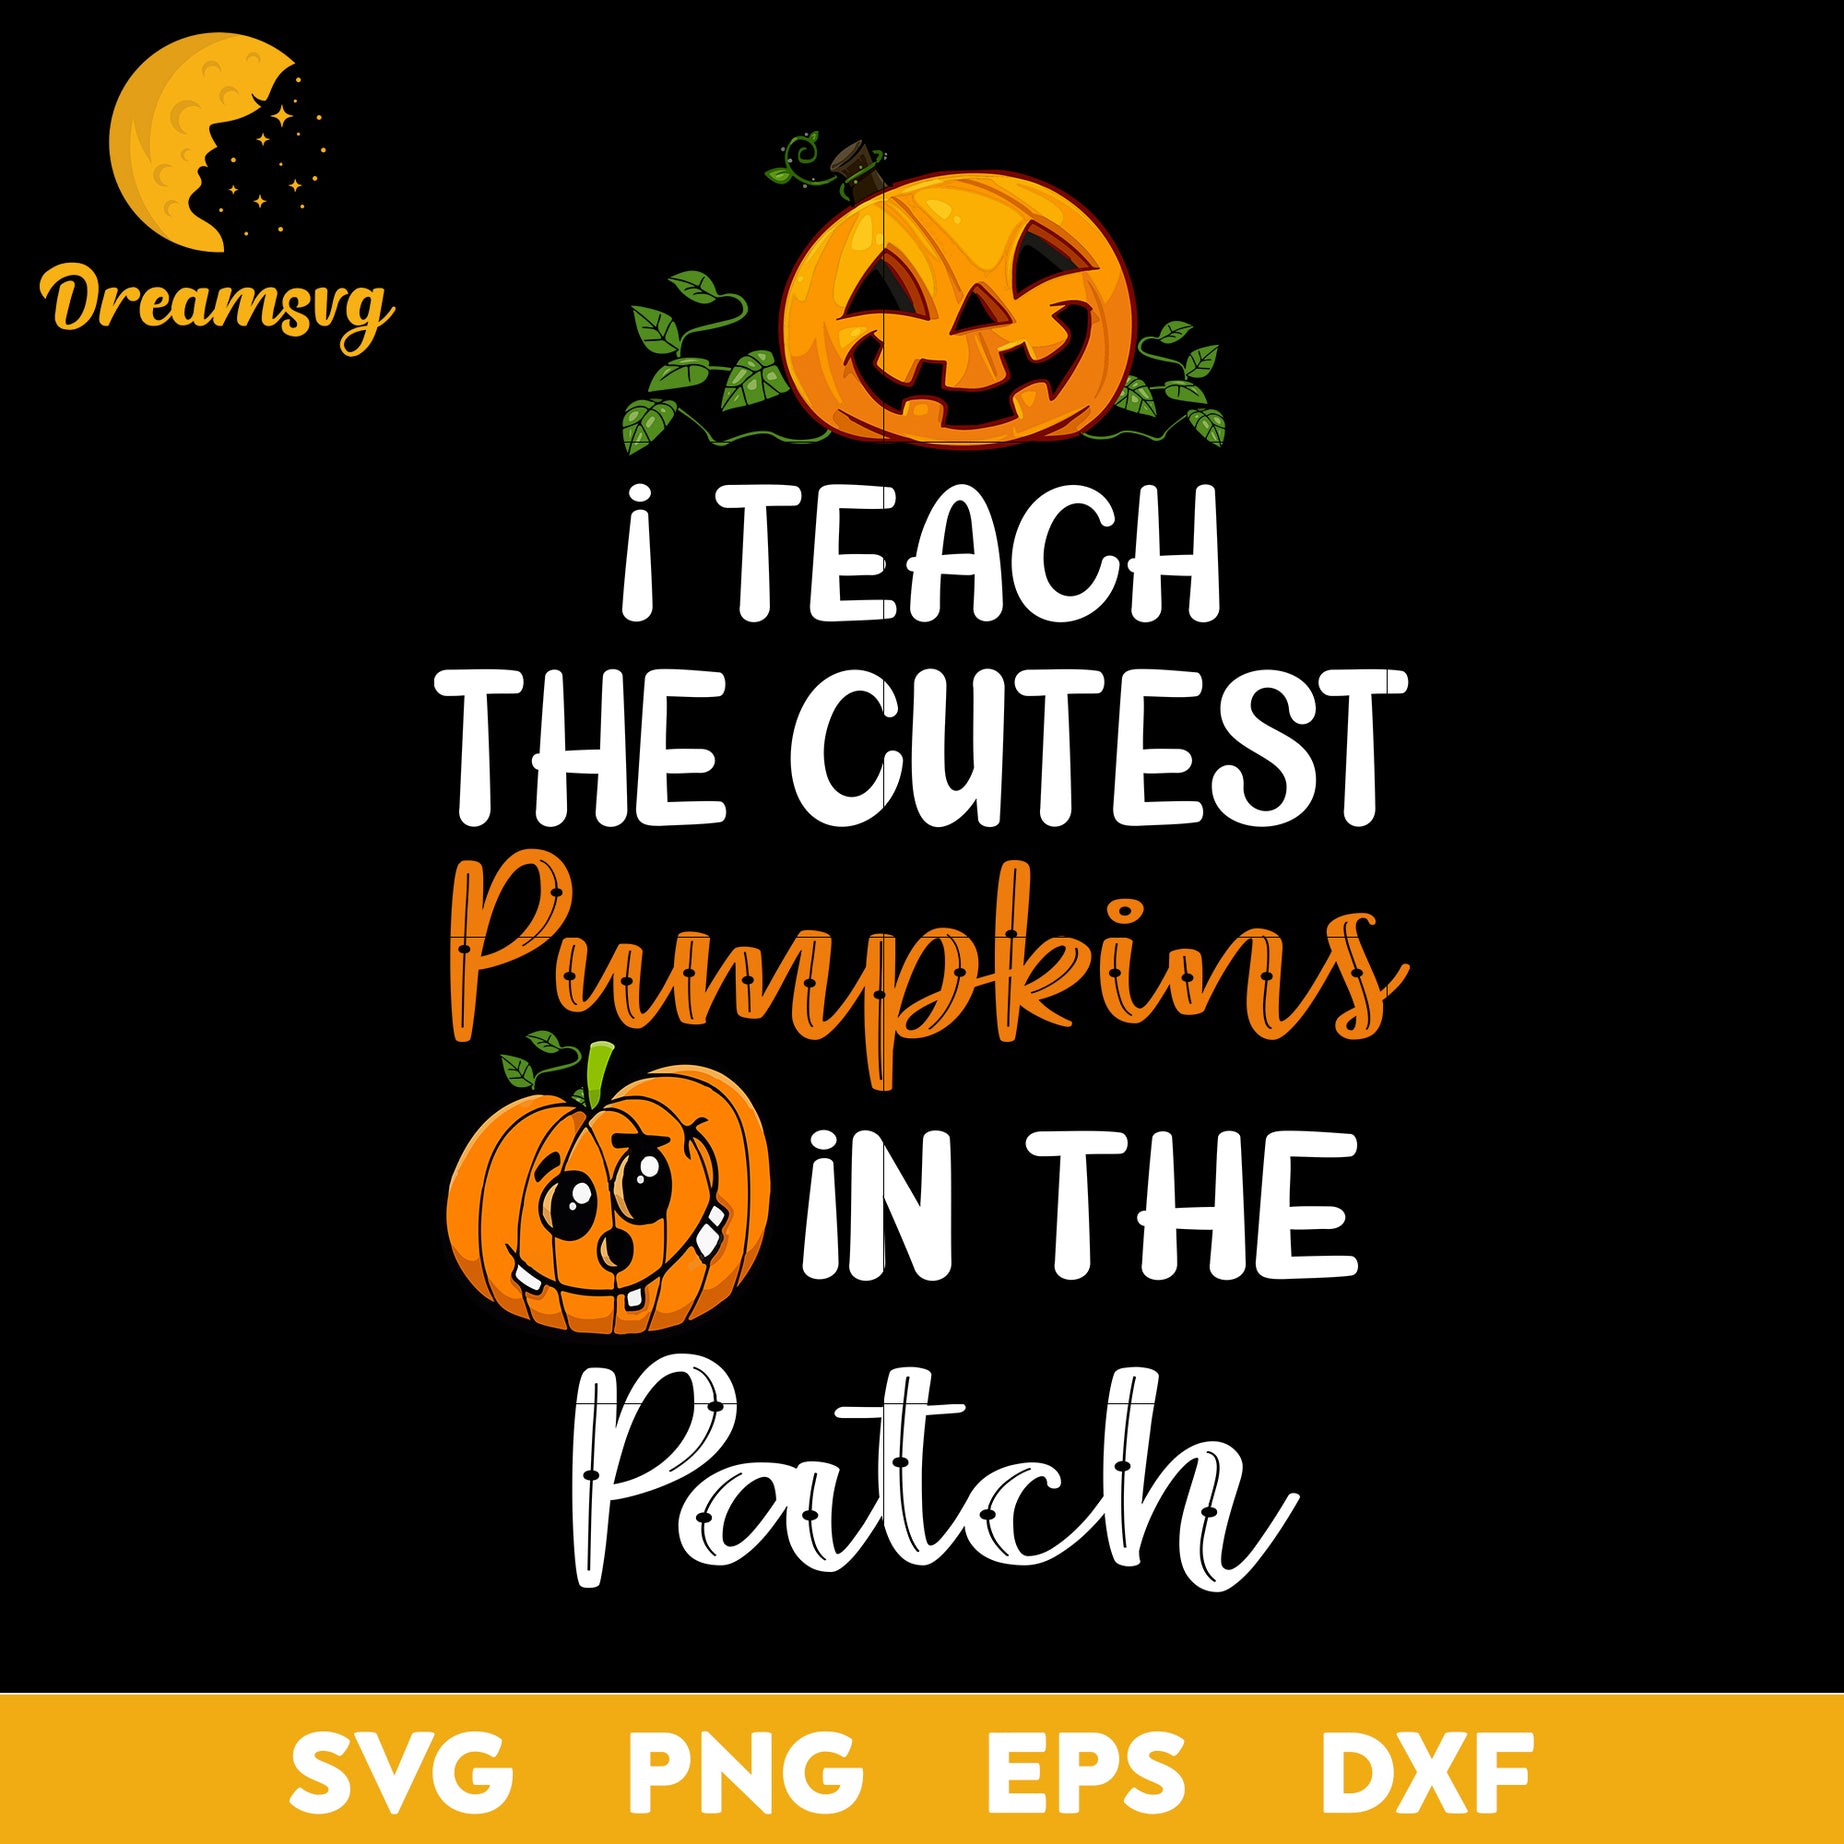 I teach the cutest pumpkins in the patch  halloween svg, Halloween svg, png, dxf, eps digital file.